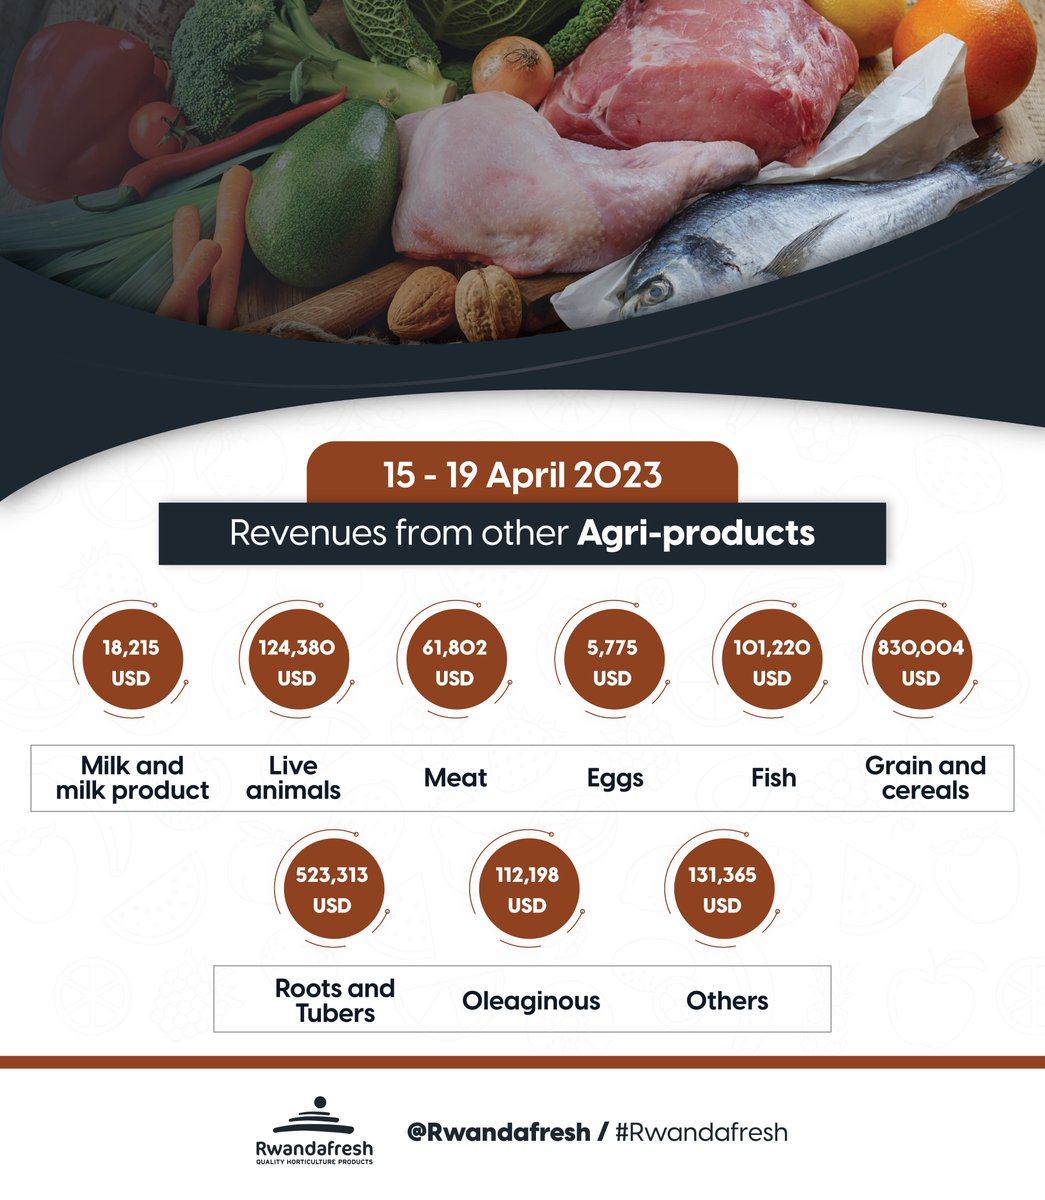 We hope this will make your day as it did ours: Last week (15-19 April 2024), Rwanda's diverse agri-products exports surged! Checkout the latest stats below and stay tuned for more weekly updates. #RwandaAgriExports